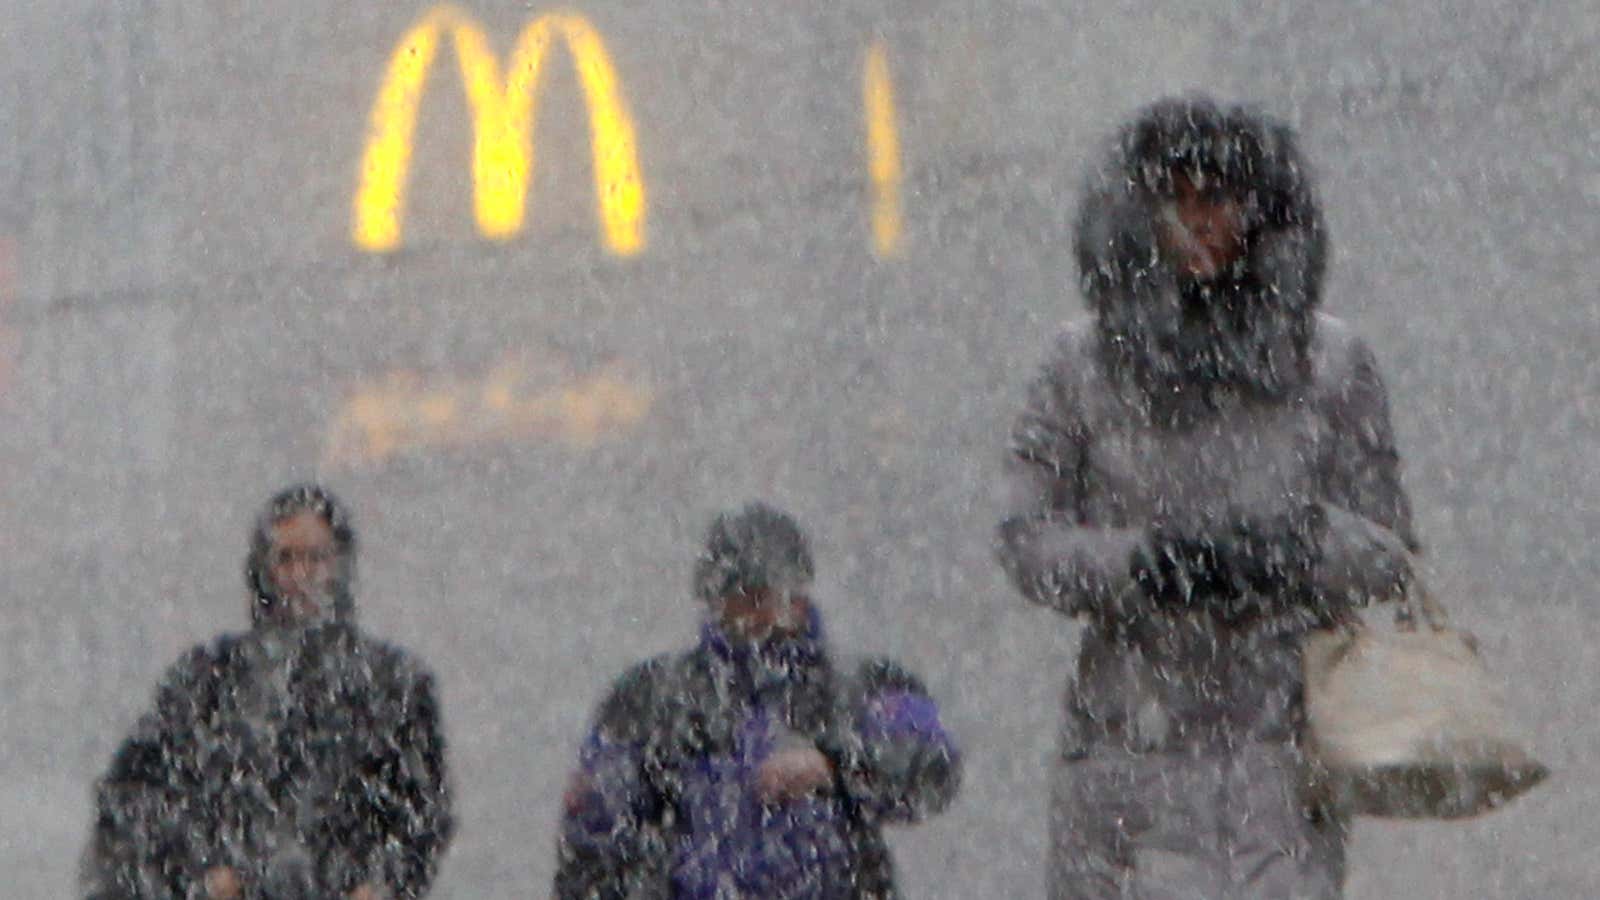 The golden arches are getting frozen out in Moscow.